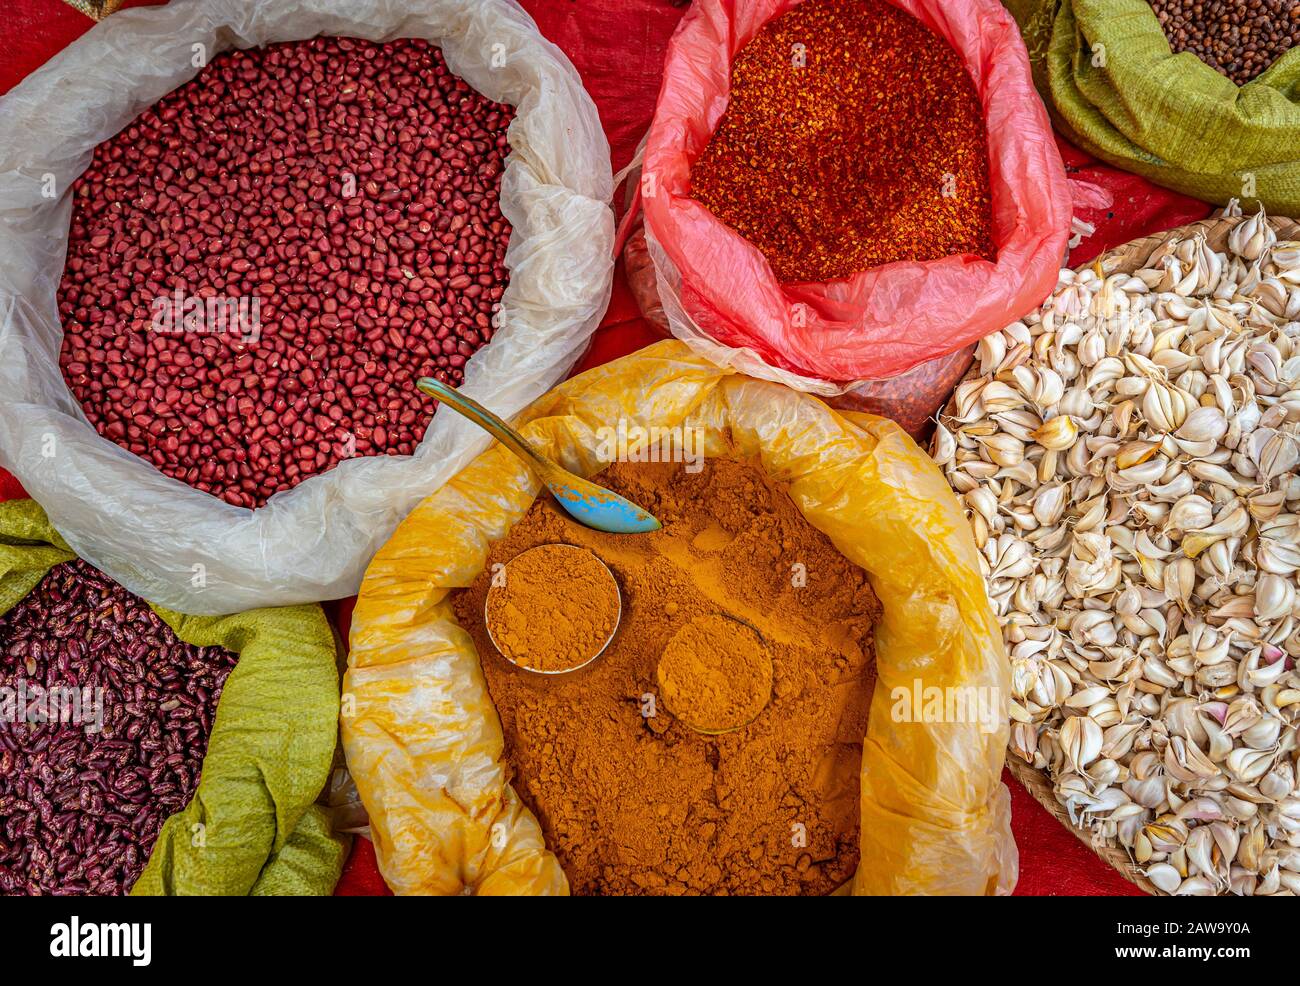 Variety of beans and spices, local market Stock Photo